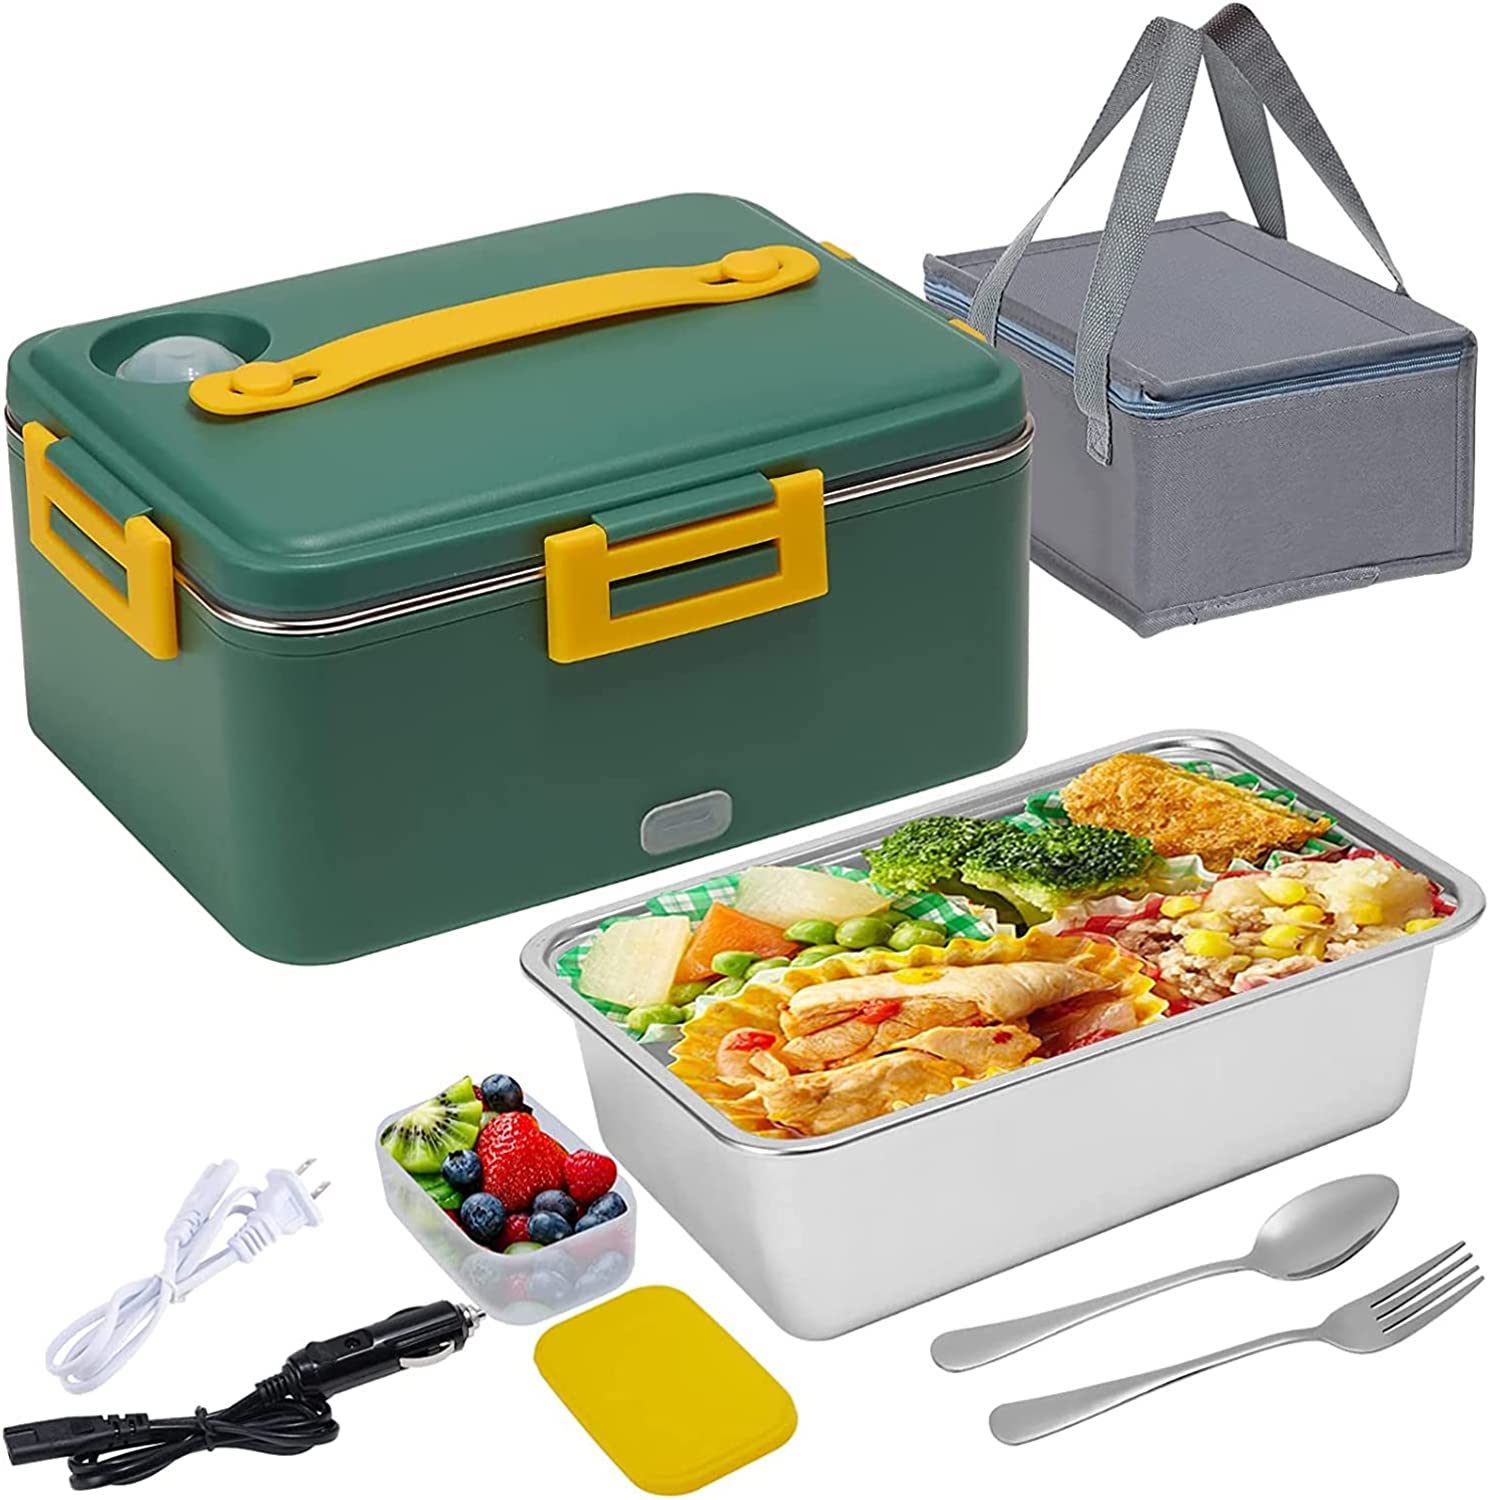 Electric lunch kit large